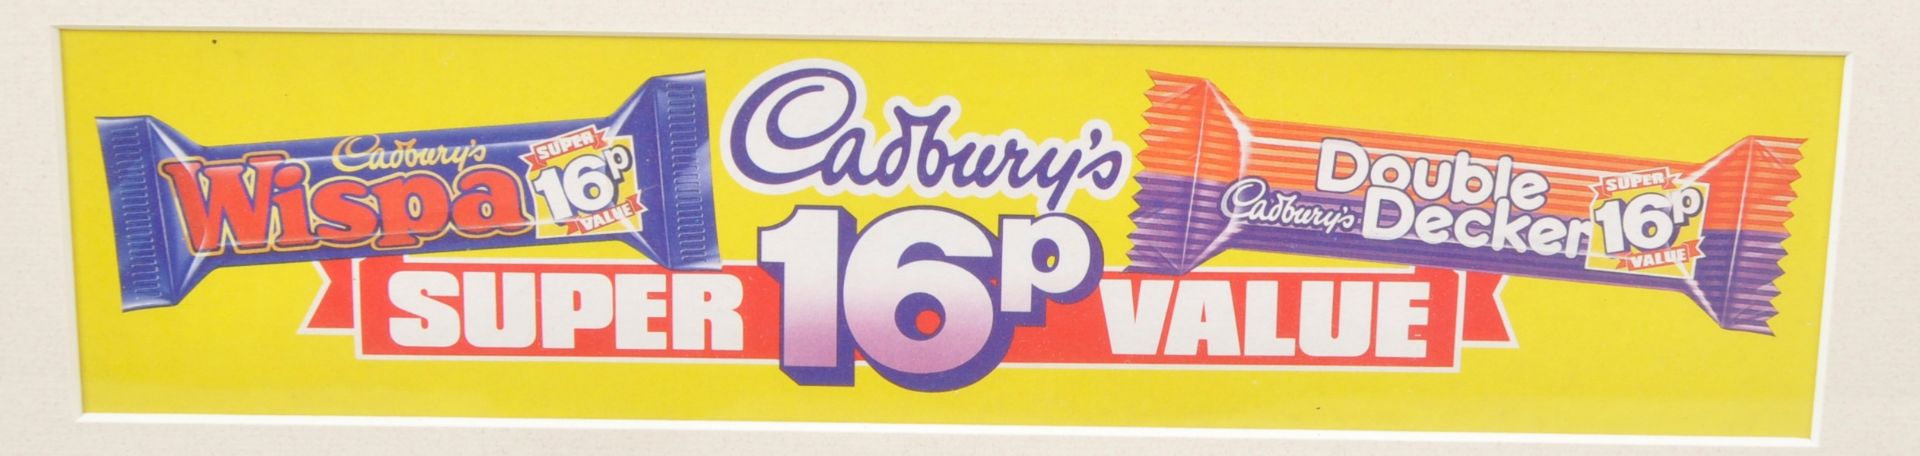 CADBURY'S SELECTION OF FOUR FRAMED ADVERTISING STRIPS - Image 4 of 6